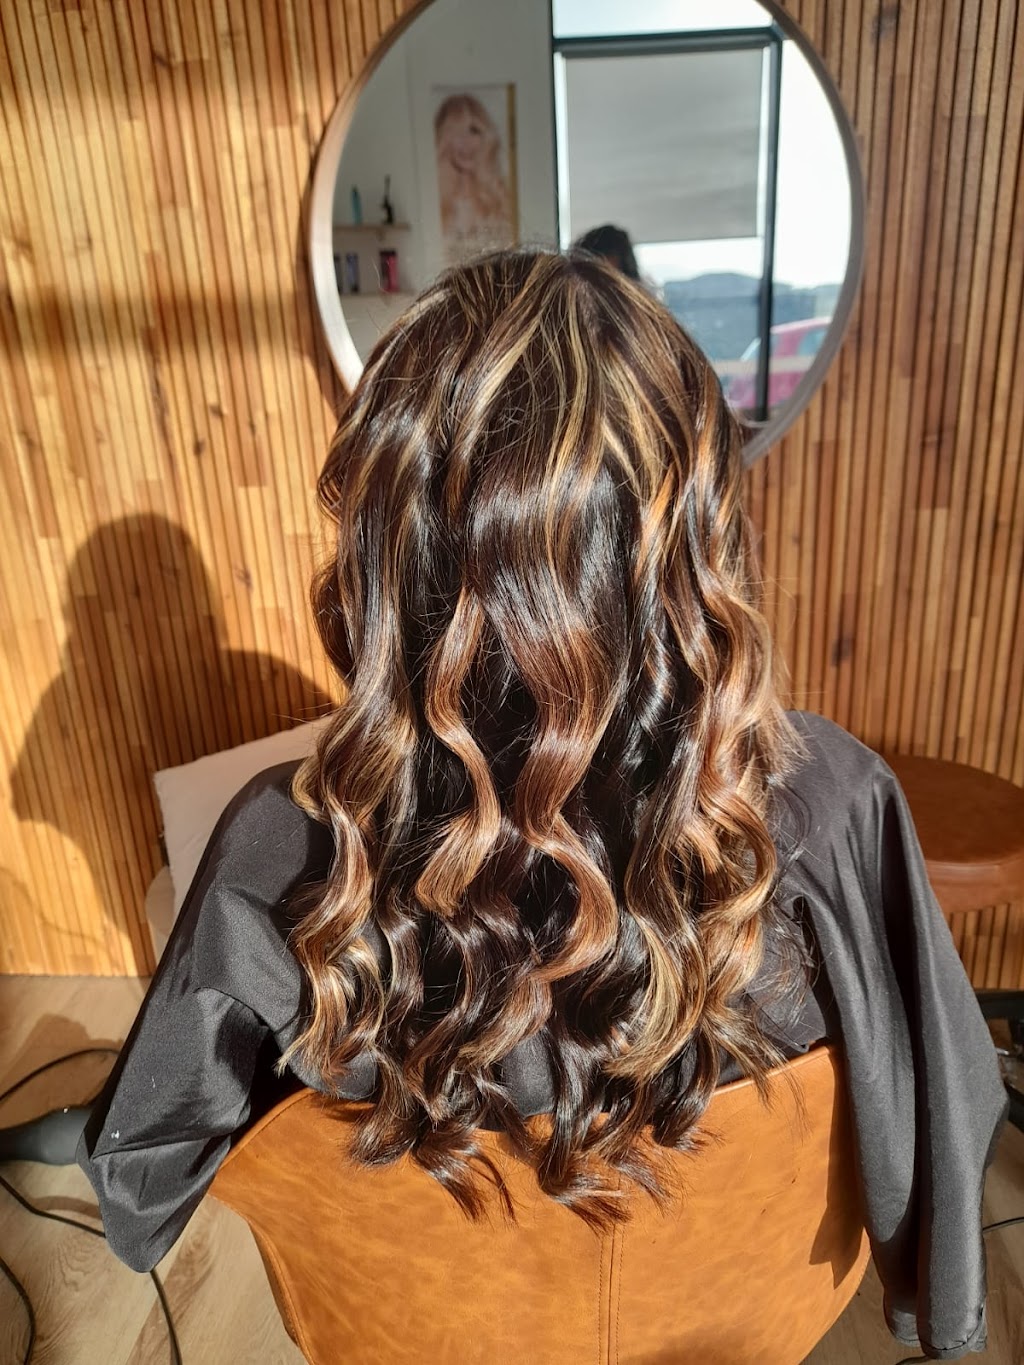 Creekside Salon | Shop 14, 770-720 Barwon heads Road, The village warralily shopping centre, Central Bvd, Armstrong Creek VIC 3217, Australia | Phone: 0469 820 038